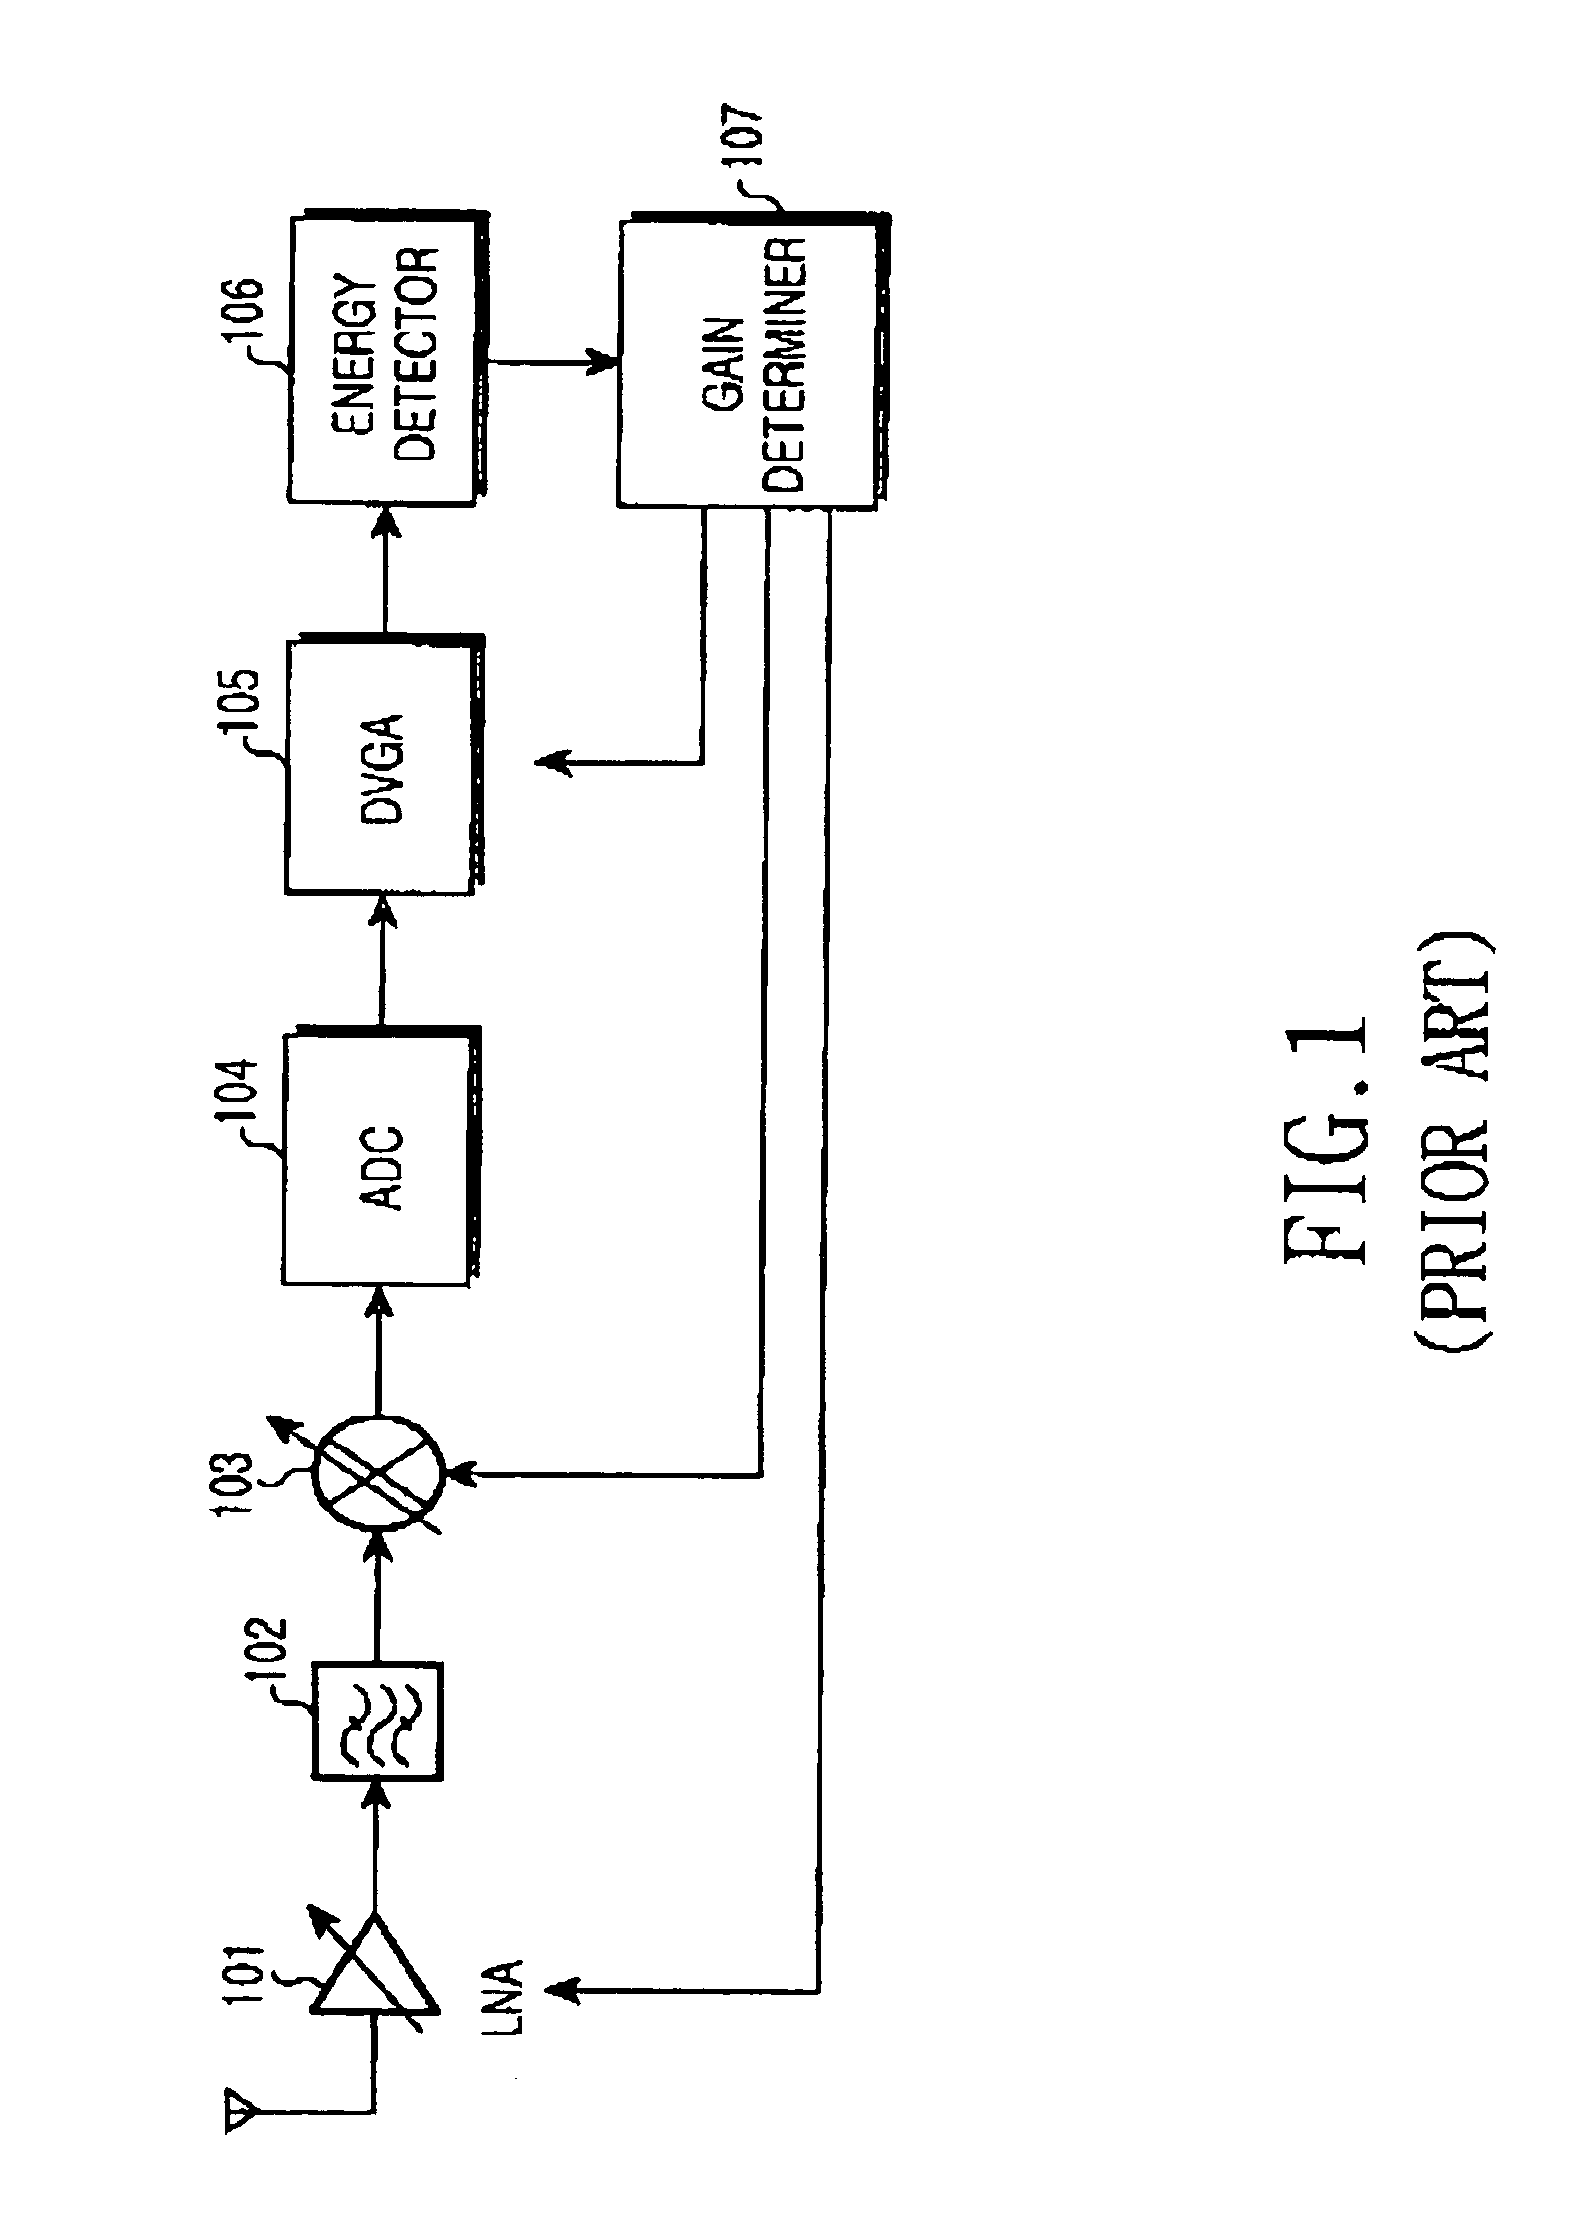 Temperature compensation device for automatic gain control loop